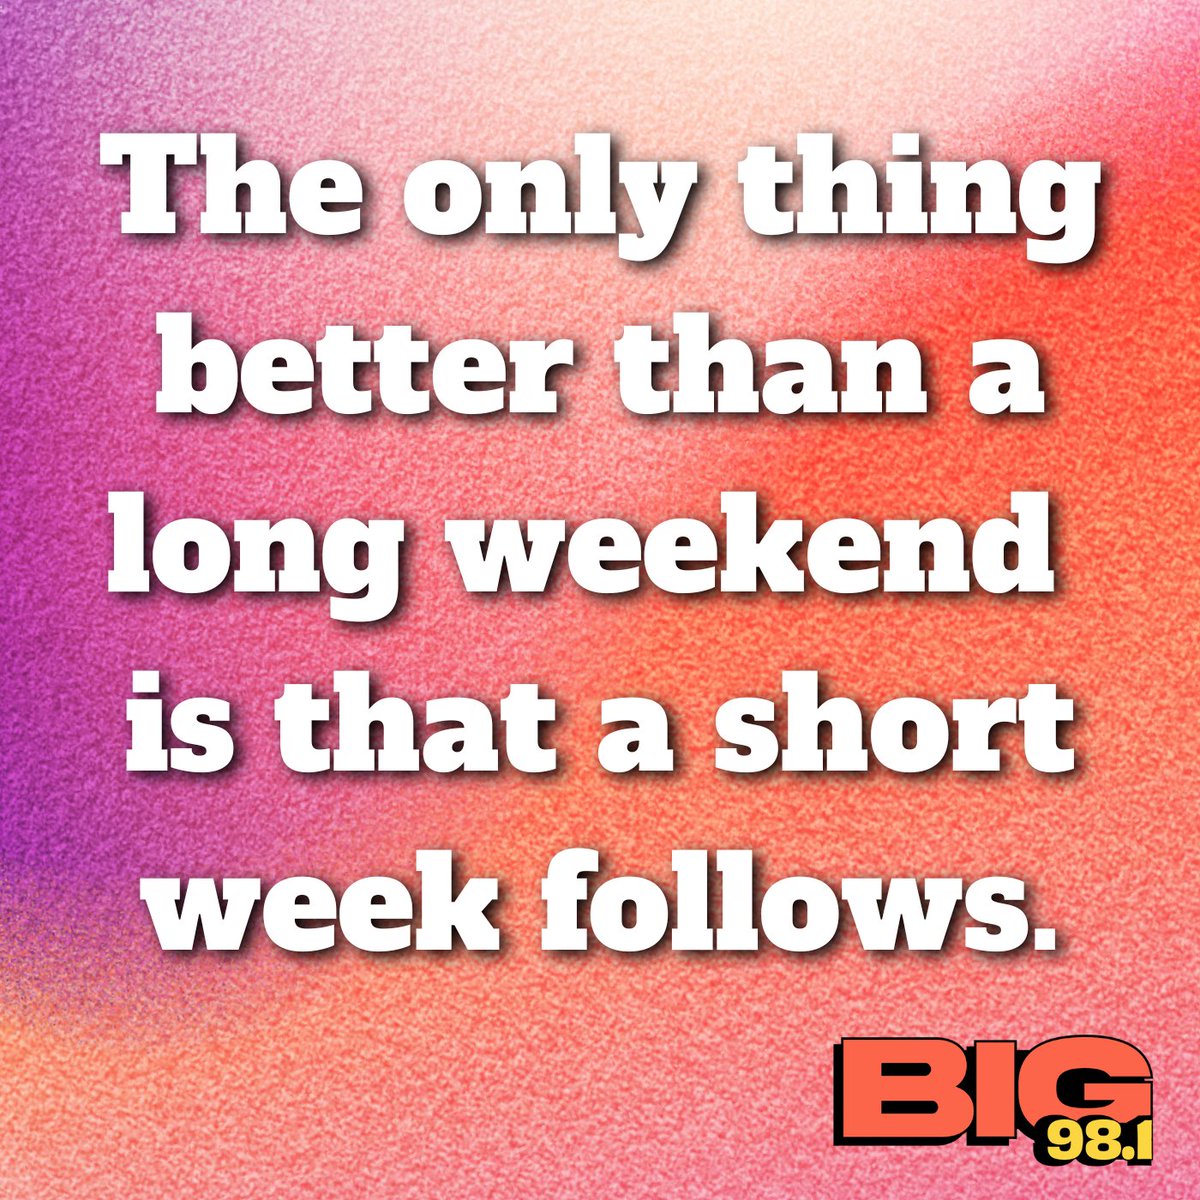 Raise your hand if you're also counting down the seconds to #MemorialDayWeekend ✋ #BIG981